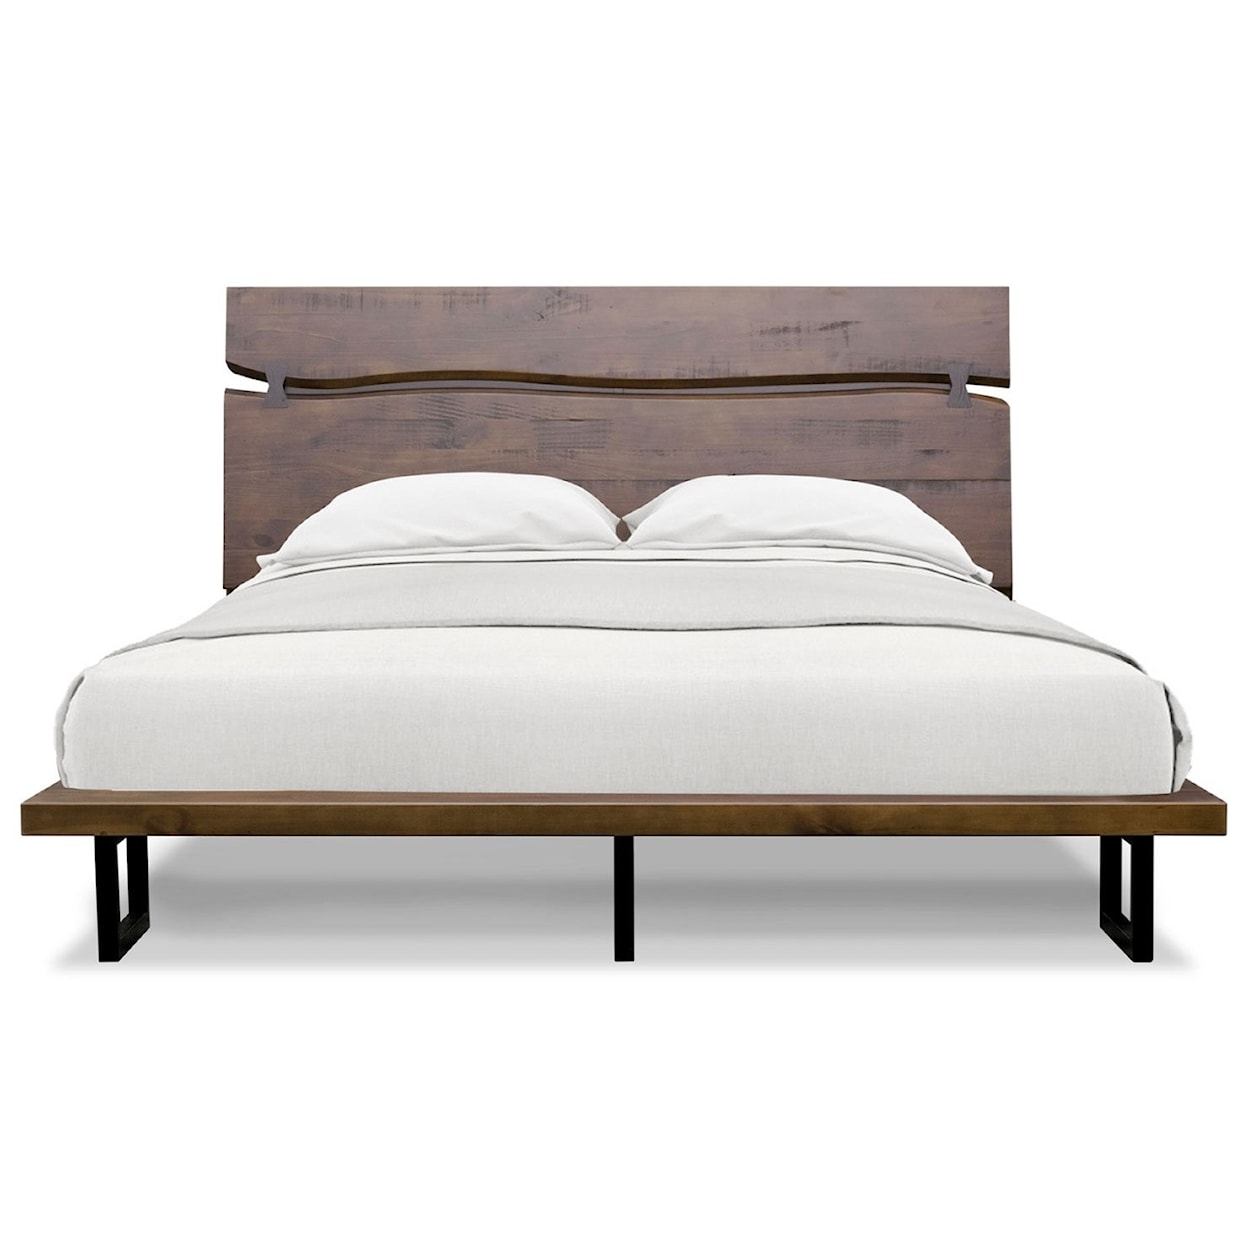 Steve Silver Pacific Pacific Queen Low Profile Bed